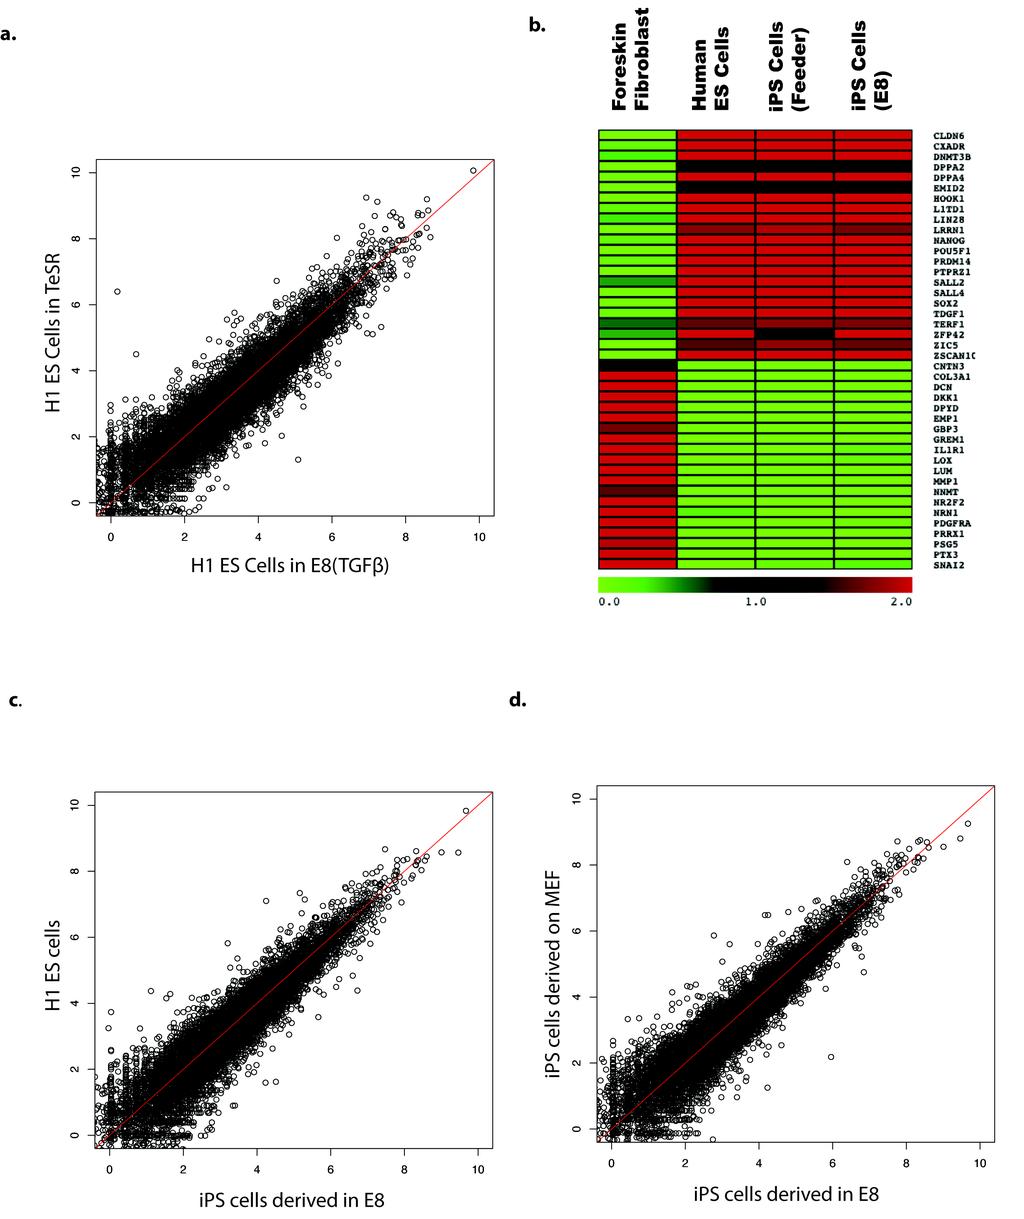 Supplementary Figure 2. Global gene expression analysis of human ES and ips cells in defined conditions. a. ES cell gene expression is similar in cells grown in E8 media compared to those in TeSR.